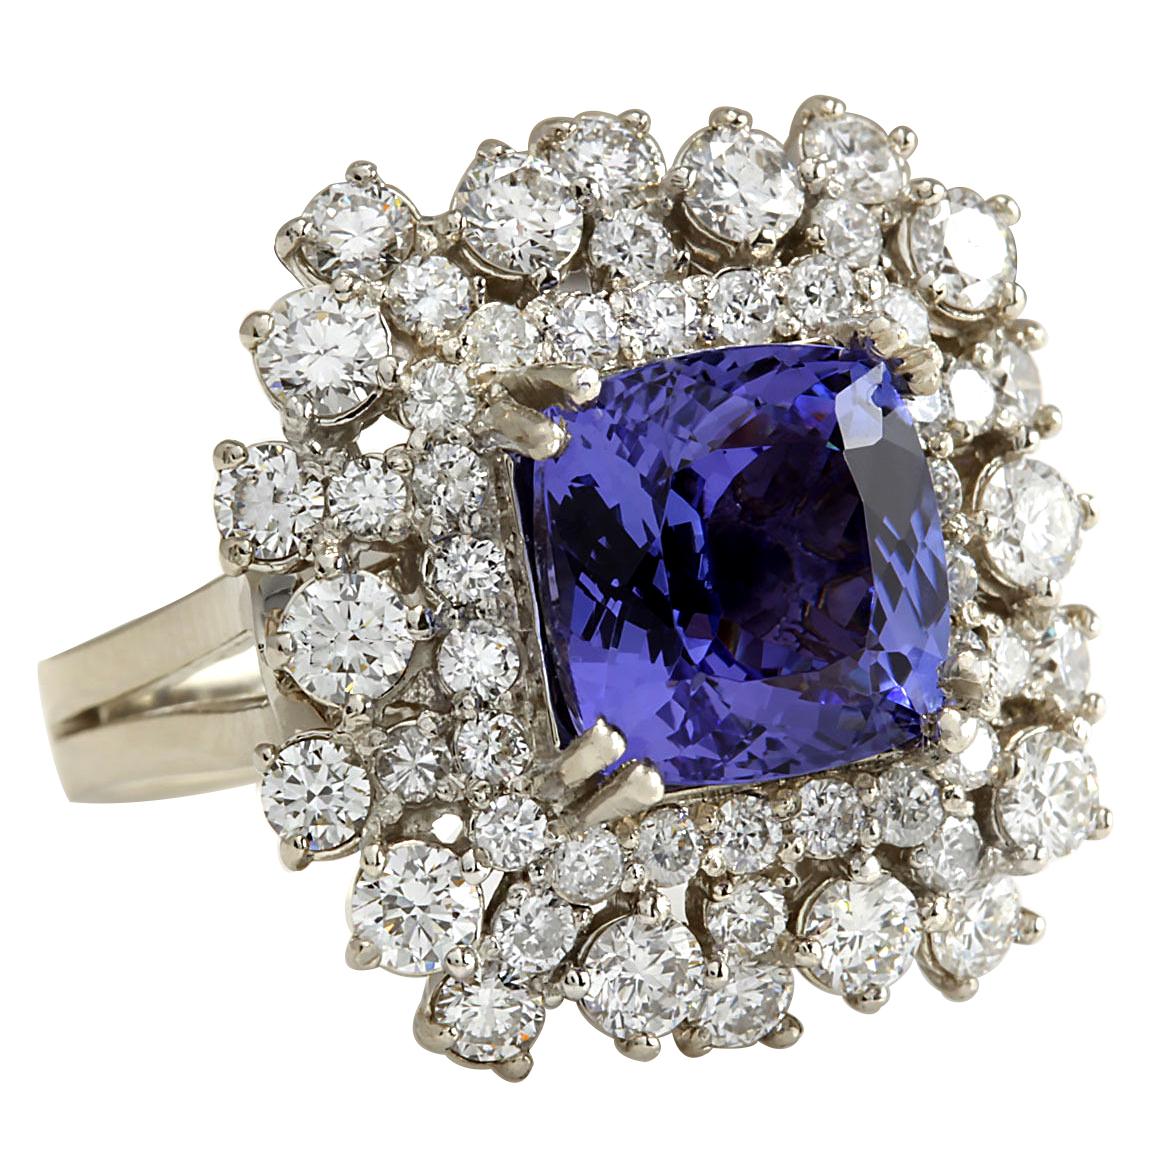 Elevate your style with this captivating Tanzanite and Diamond Ring, crafted in luxurious 14K white gold. The centerpiece is a mesmerizing 7.57 carat Tanzanite, exuding rich hues and measuring 9.50x9.50 mm. Surrounding it are dazzling diamonds